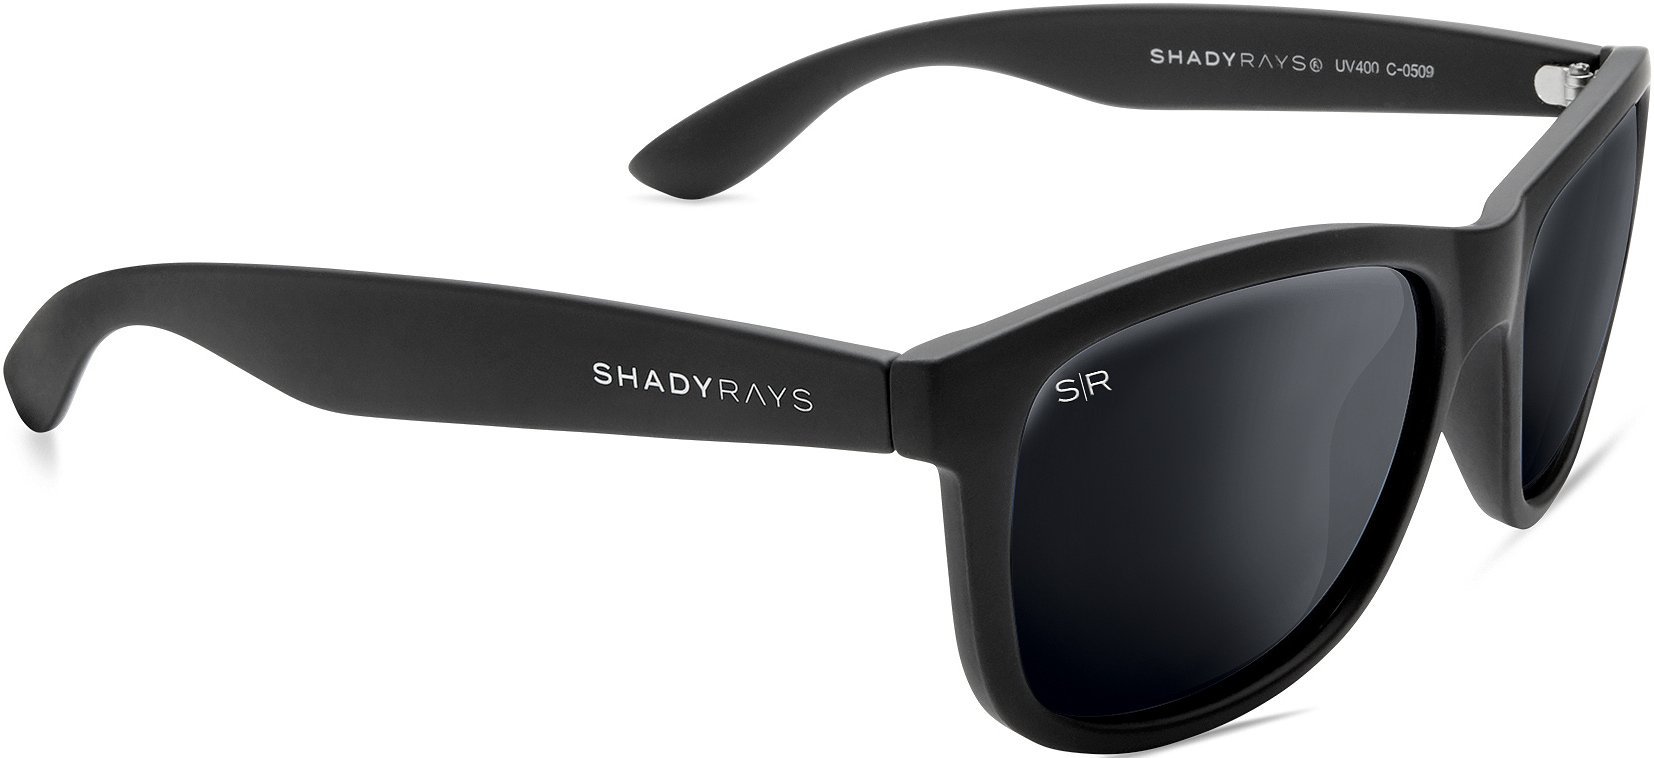 Signature Series - Blackout Sunglasses | Black Sunglasses | Best Christmas Gifts | Gifts for The Holidays | Unique Gifts for Friends| Shady Rays